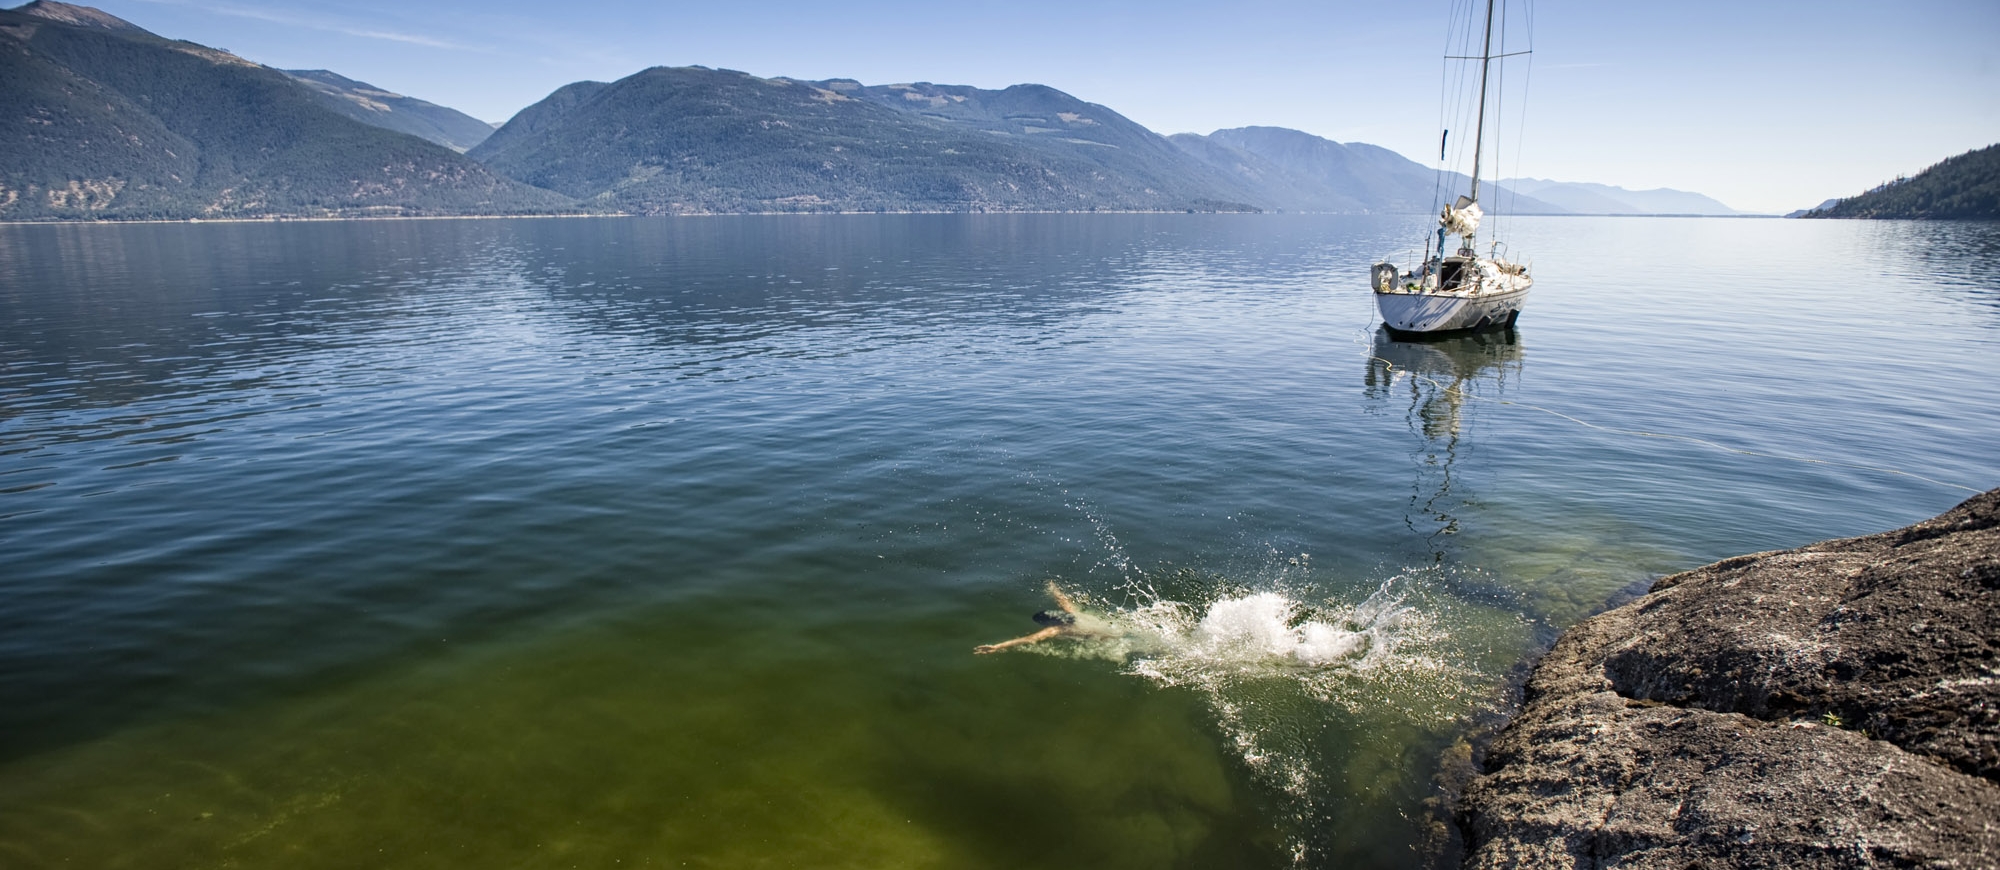 Jumping into Kootenay Lake with a sailboat in the background. 